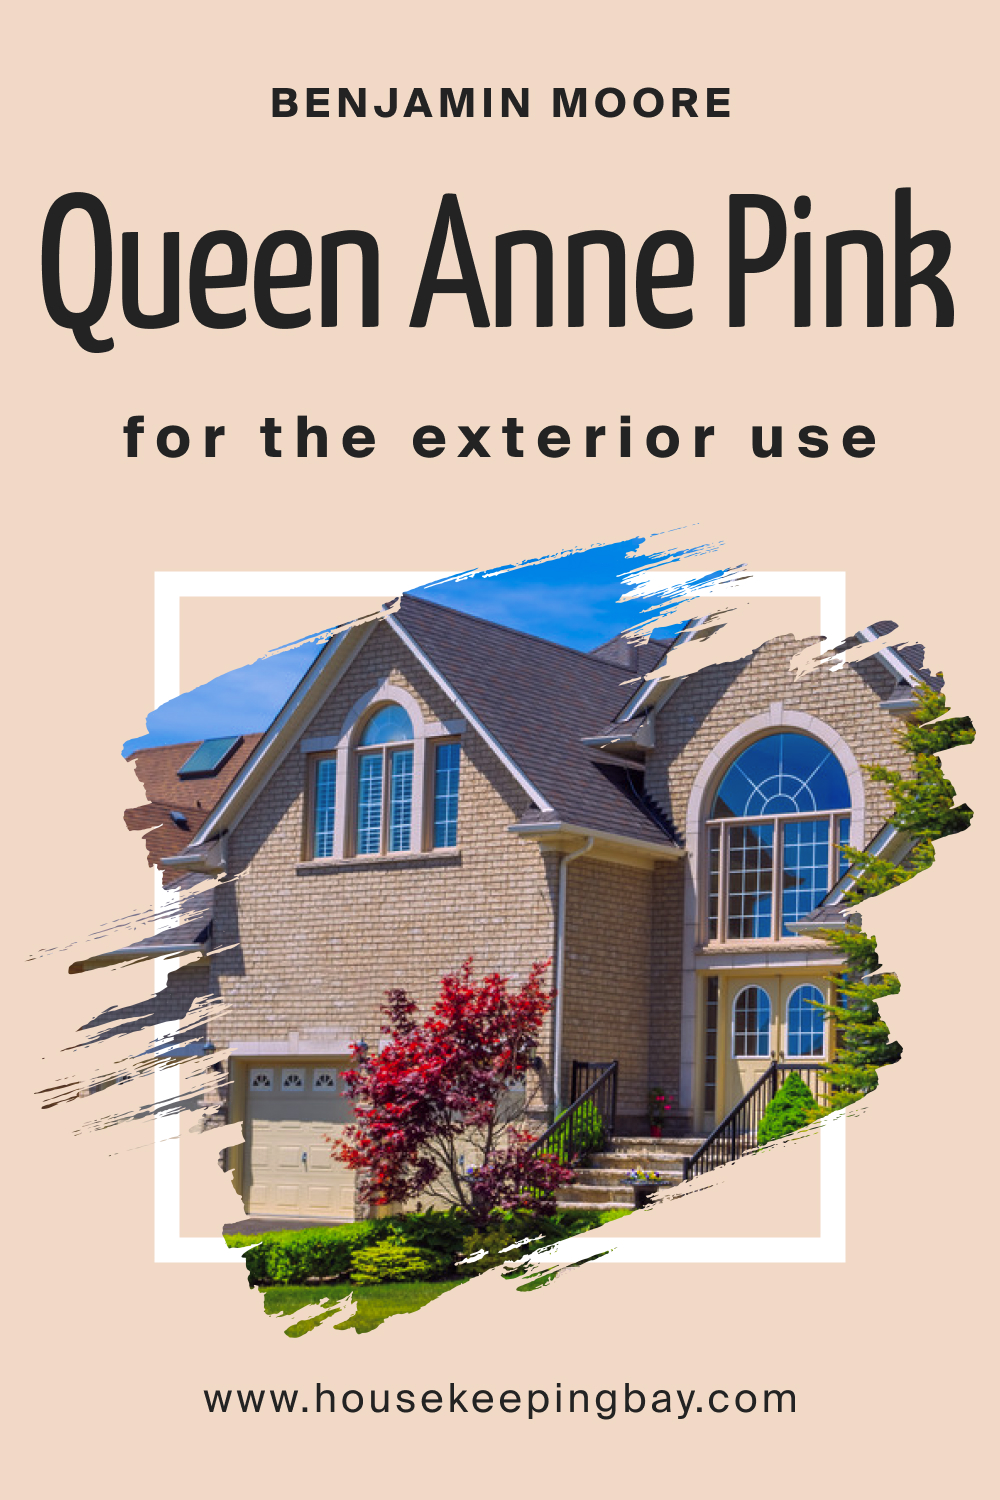 How to Use Queen Anne Pink HC-60 for an Exterior?